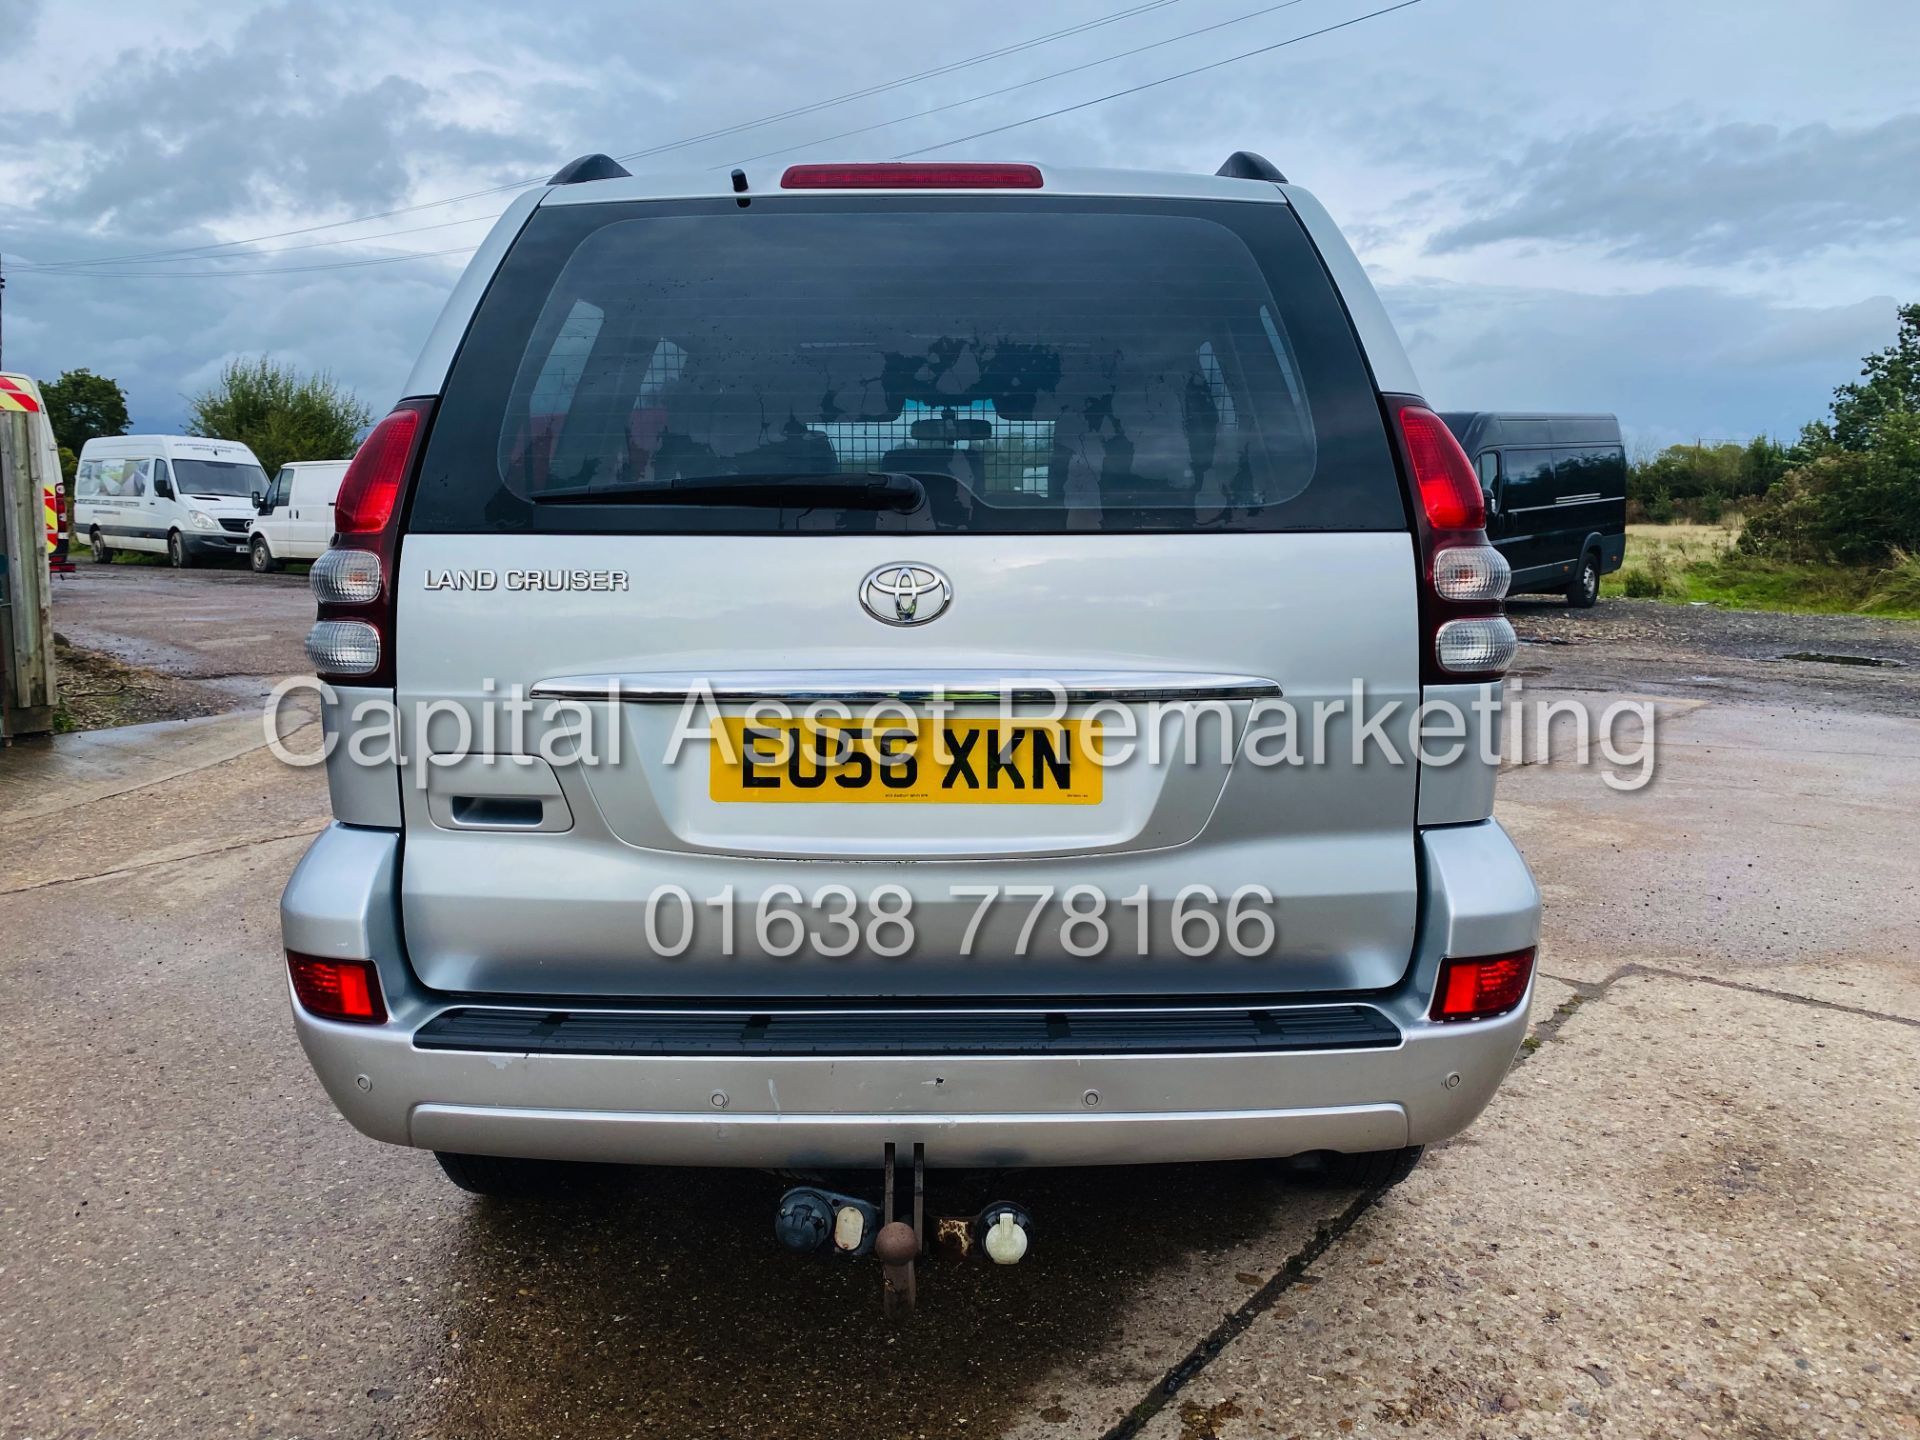 (On Sale) TOYOTA LAND CRUISER 3.0 D-4D LC5 AUTO (56 REG) 1 LADY OWNER *TOP SPEC* (NO VAT - SAVE 20%) - Image 10 of 29